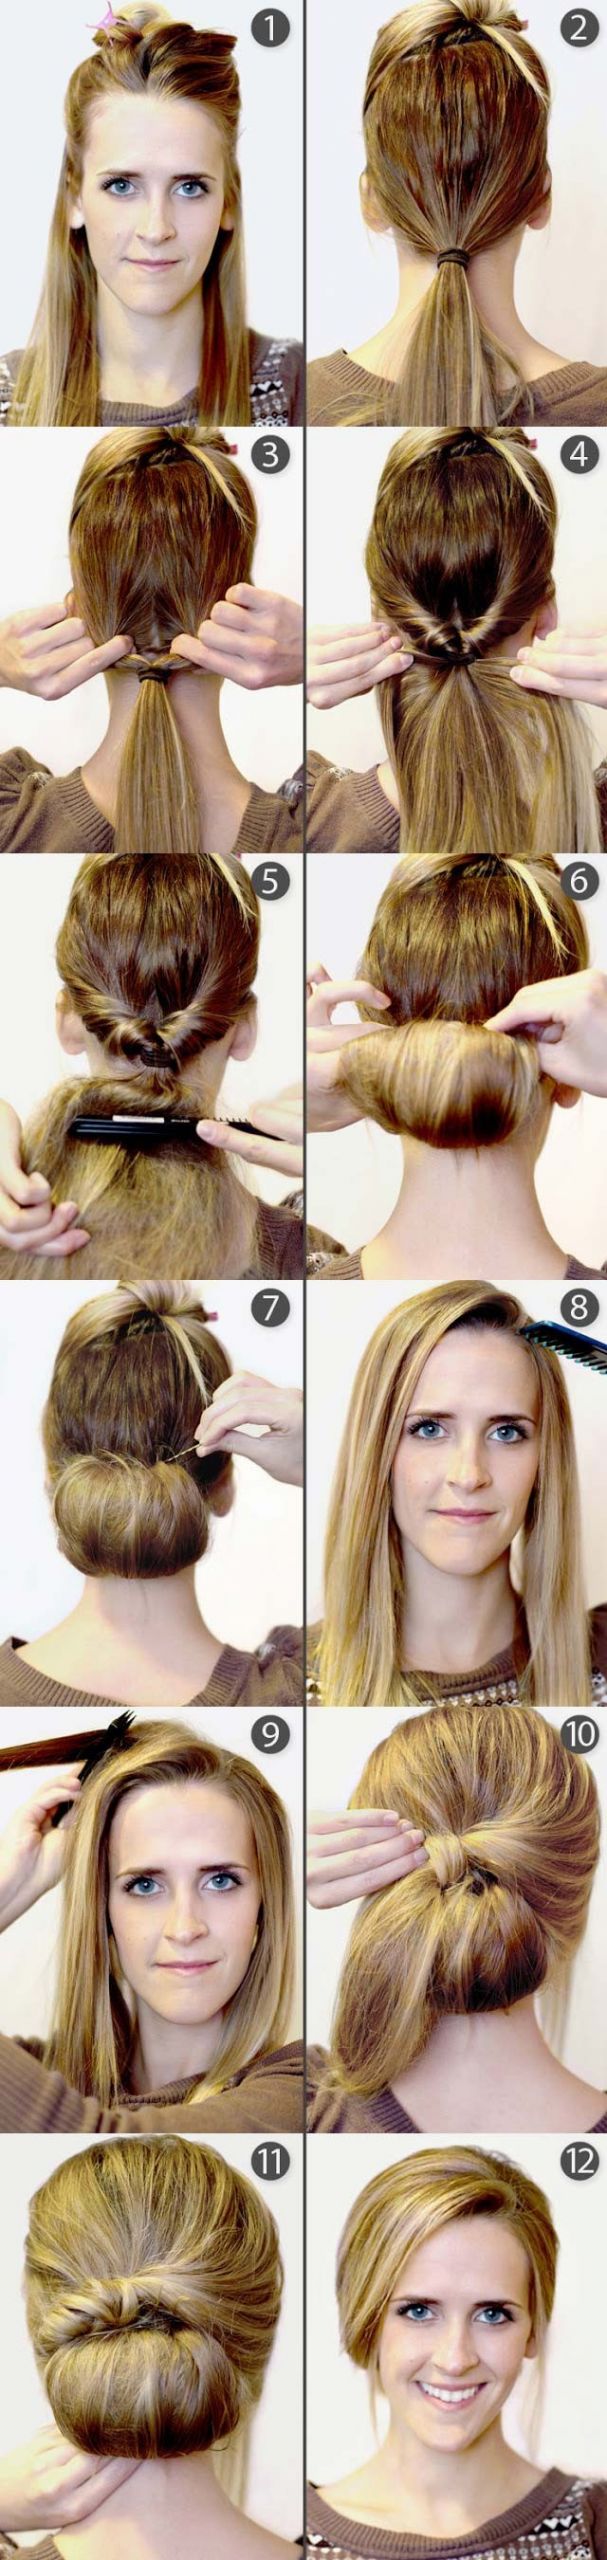 Easy Hairstyle Steps
 15 Cute hairstyles Step by Step Hairstyles for Long Hair